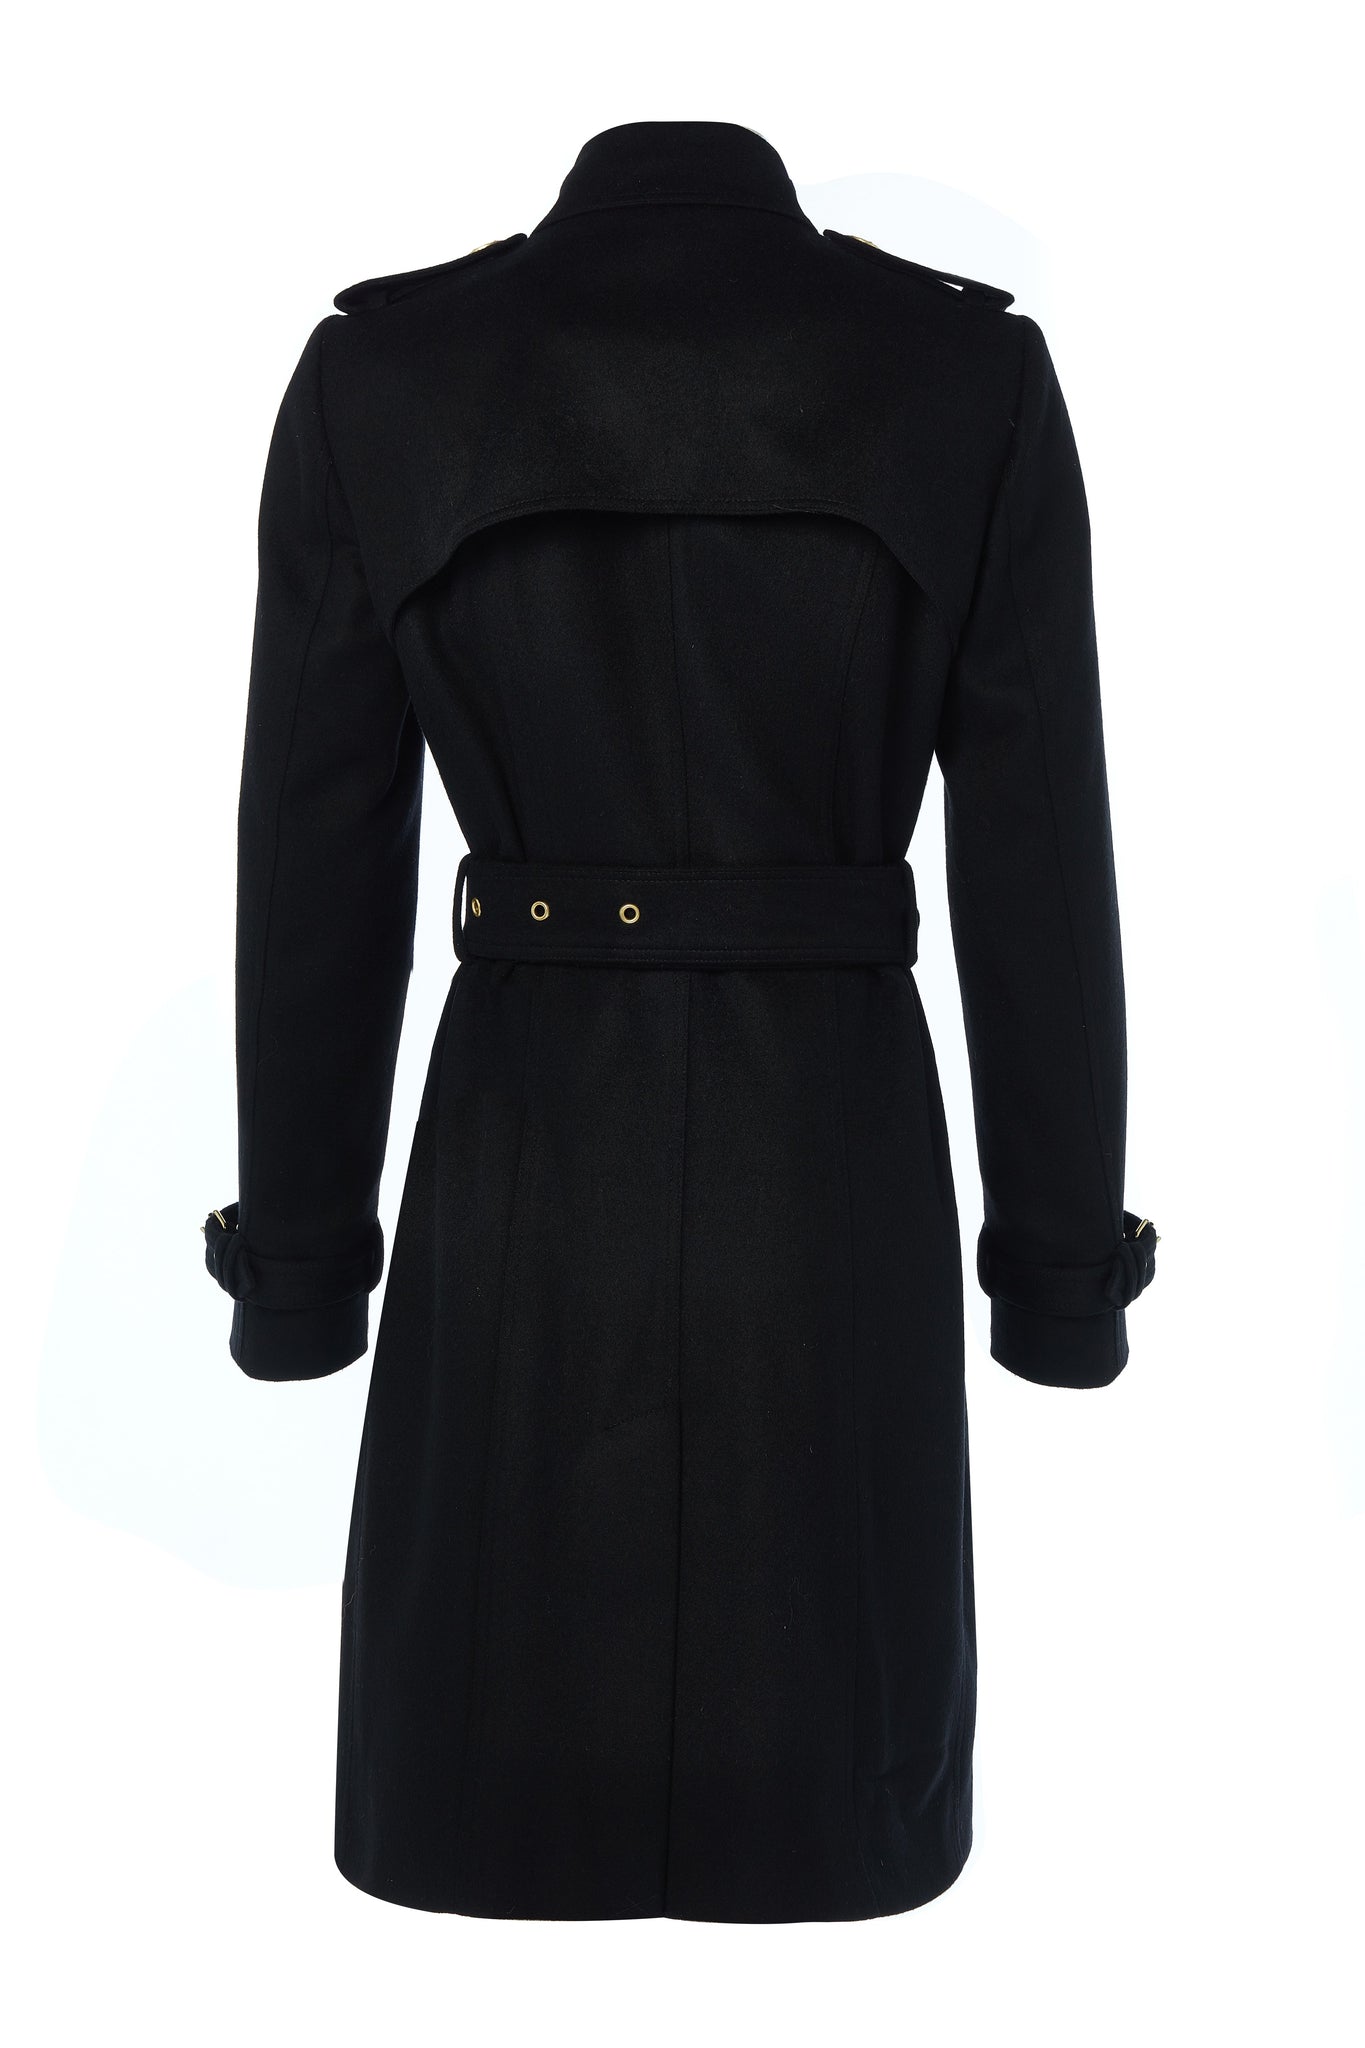 Back shot of womens black detailed with gold hardware knee length wool trench coat